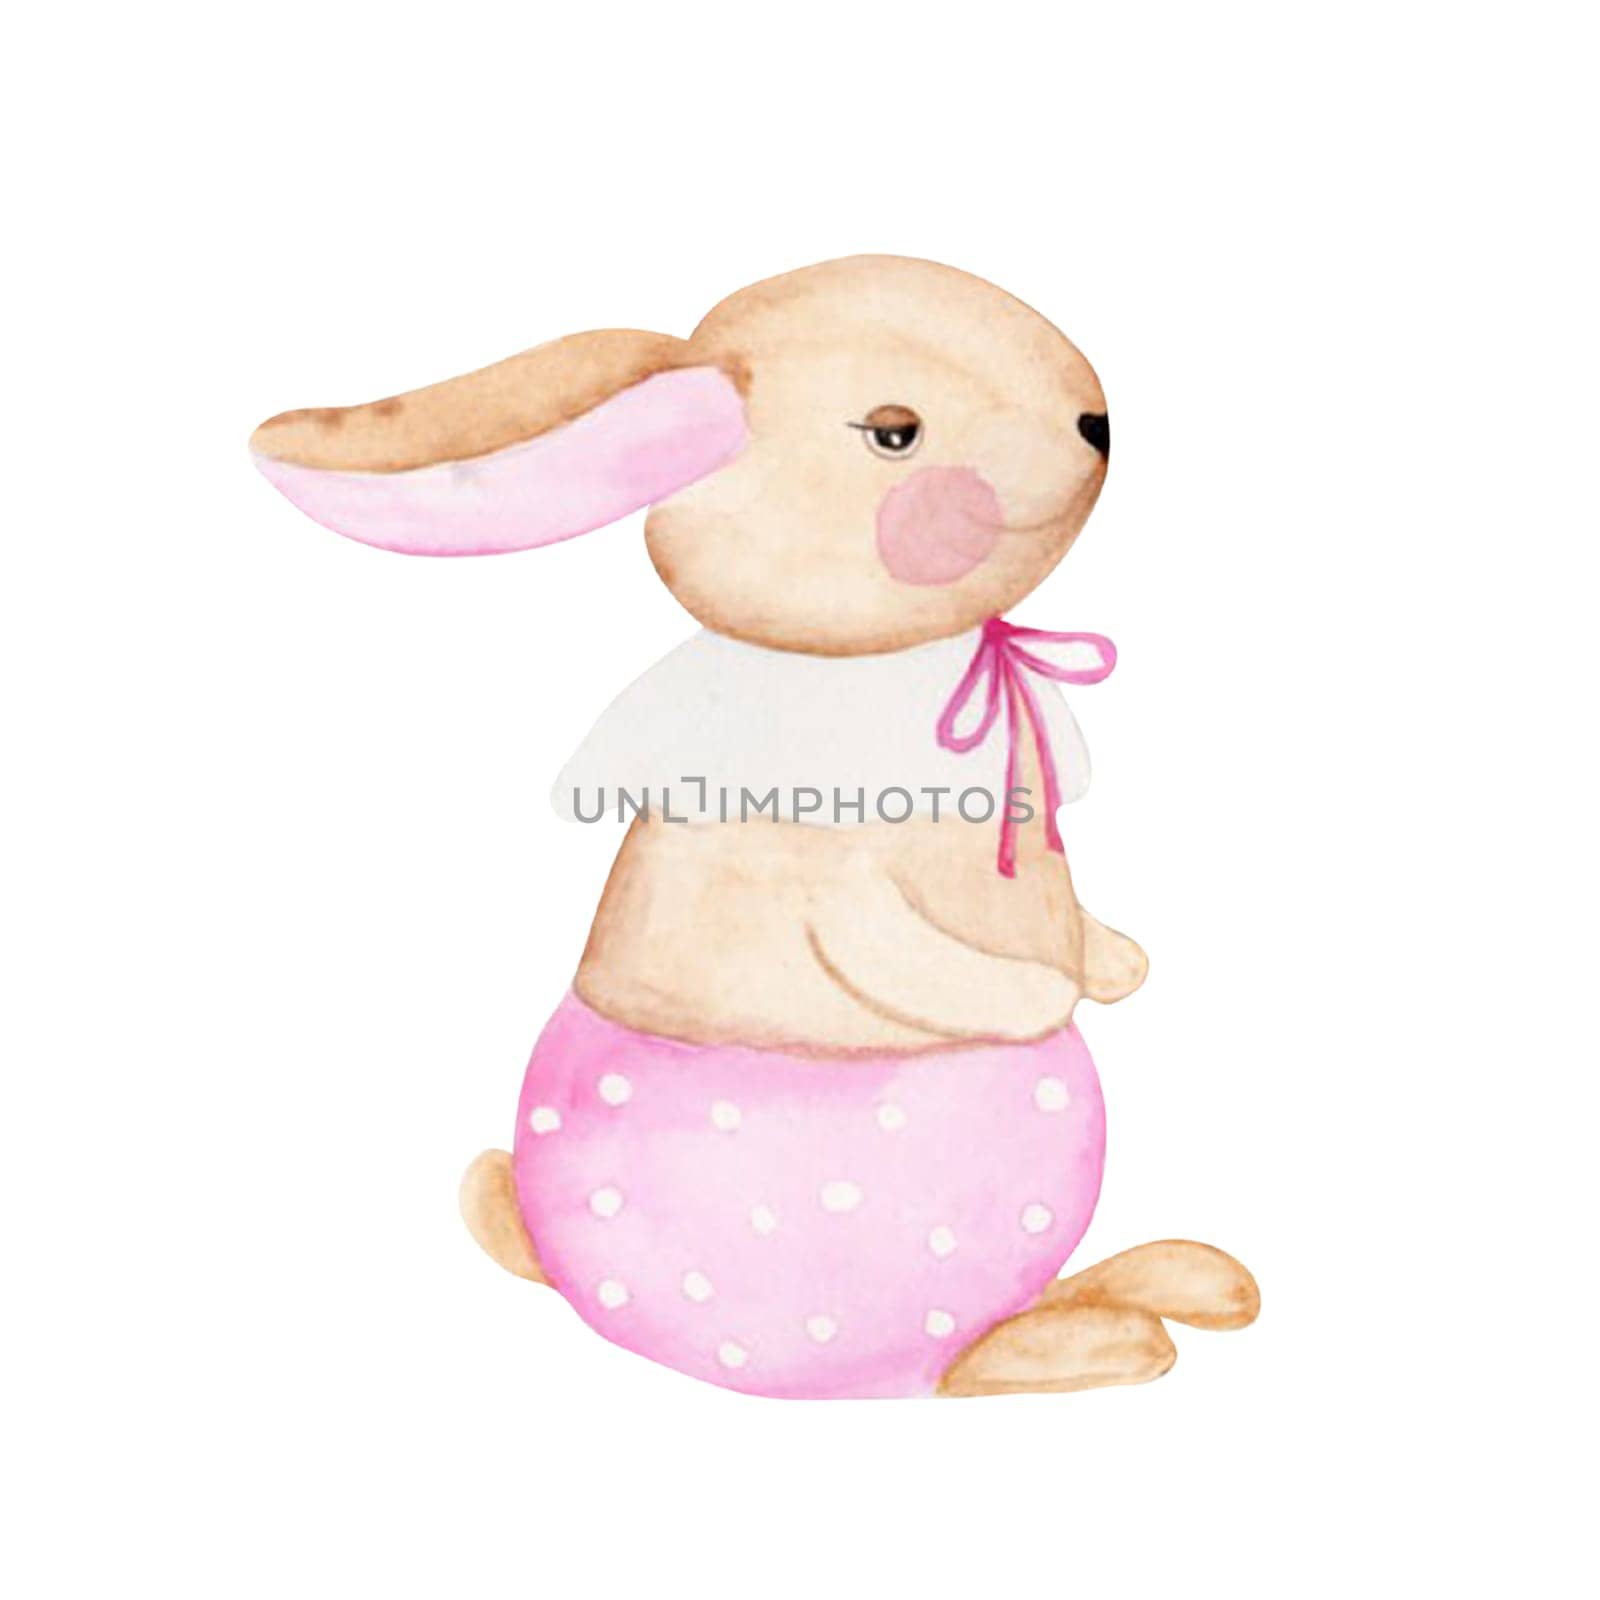 Bunny cute watercolor drawing on a white background isolate. Rabbit in pink pants with a bow. A nice illustration for decorating cards and invitations for Easter and printing on children's textiles. Cartoon hare.